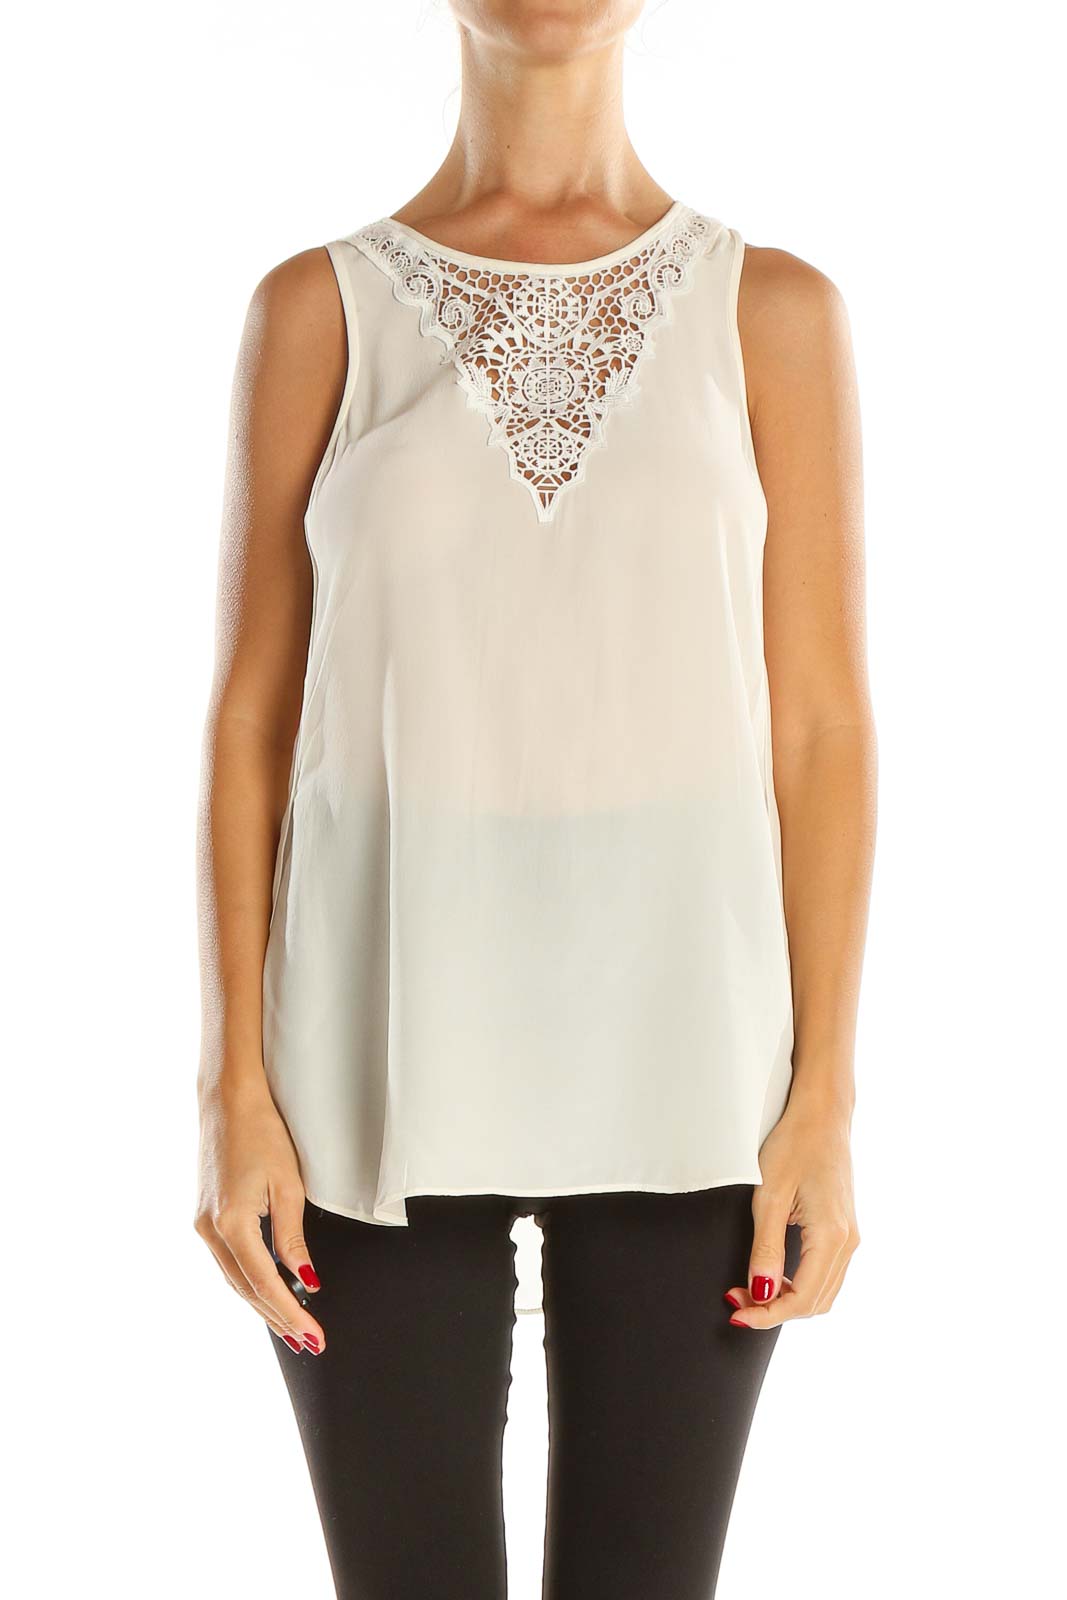 White Lace Chic Top Front